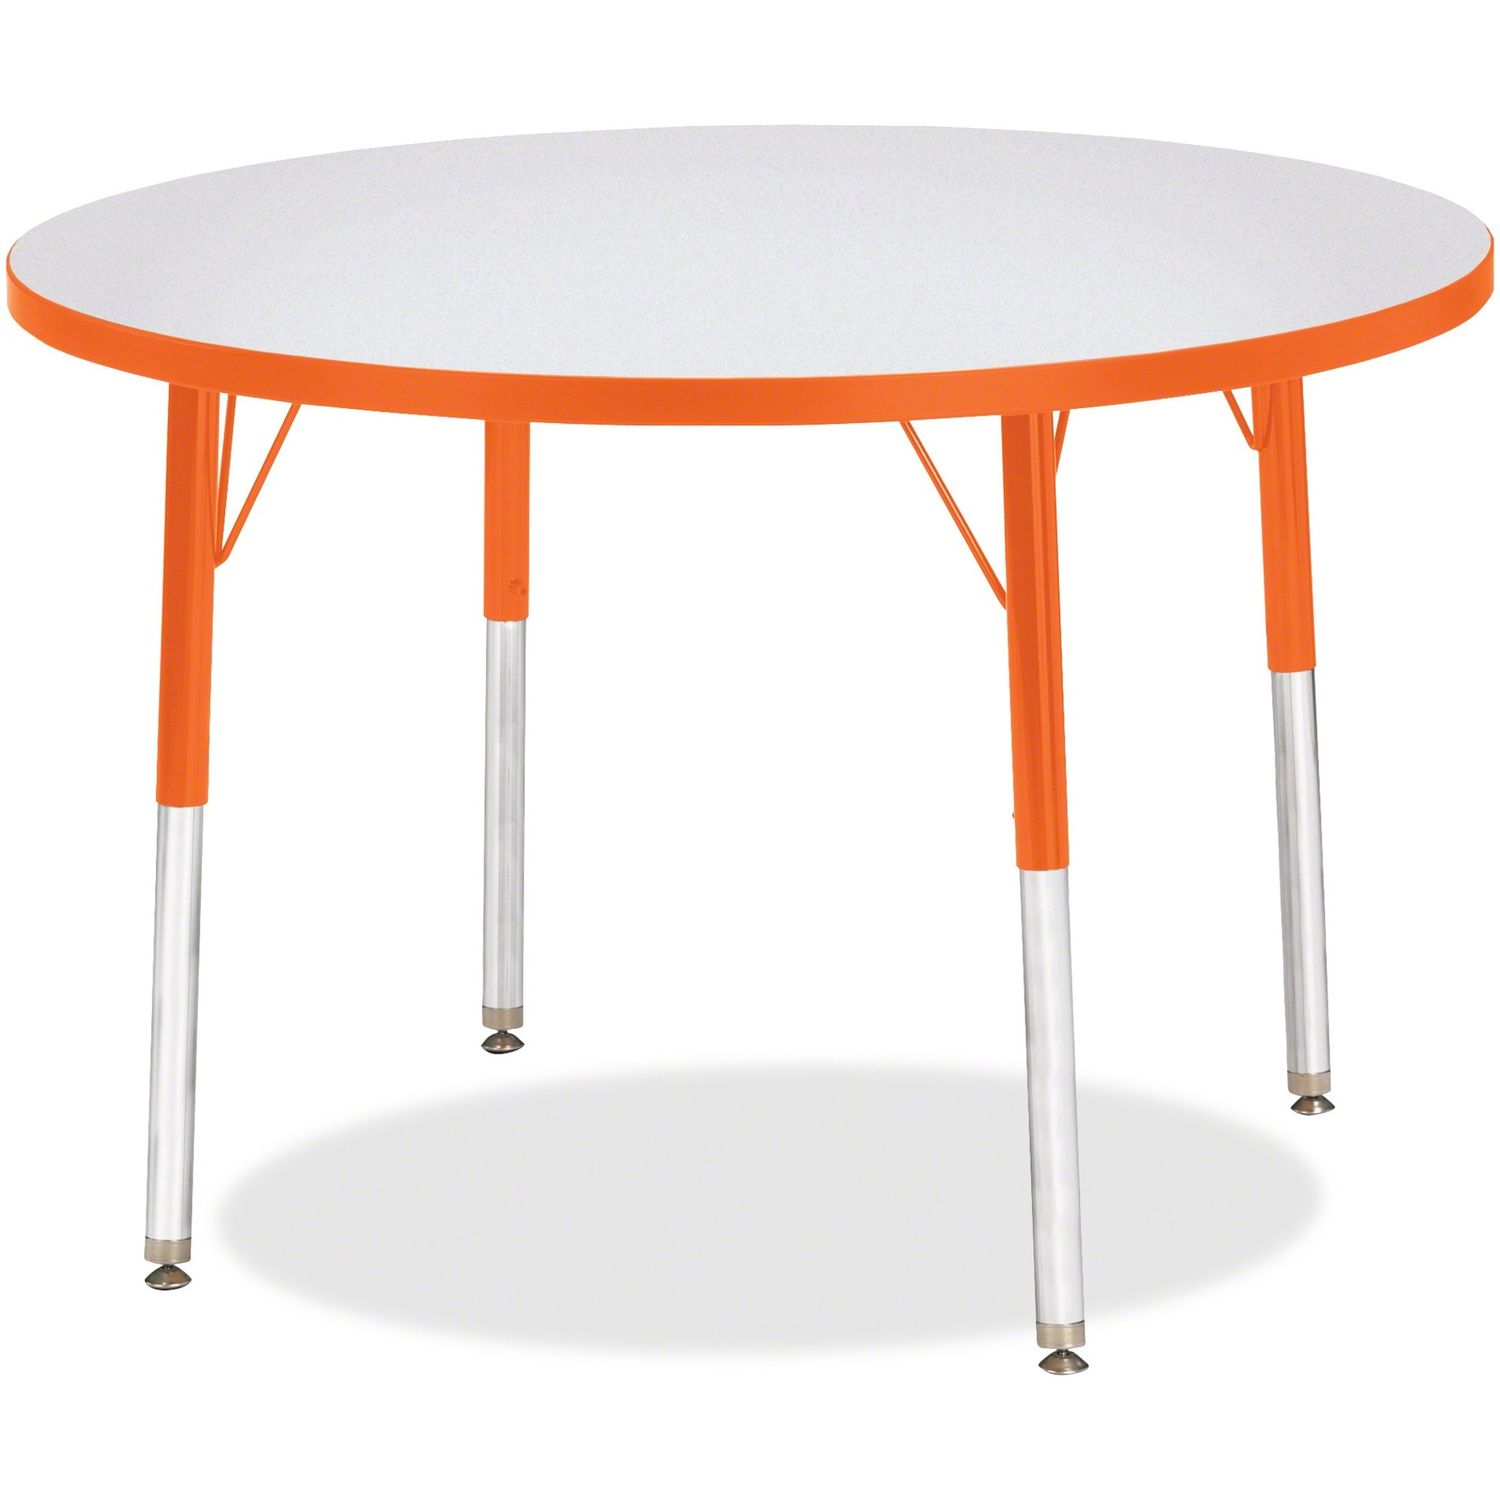 Berries Adult Height Color Edge Round Table Laminated Round, Orange Top, Four Leg Base, 4 Legs, 1.13" Table Top Thickness x 36" Table Top Diameter, 31" Height, Assembly Required, Powder Coated, Steel